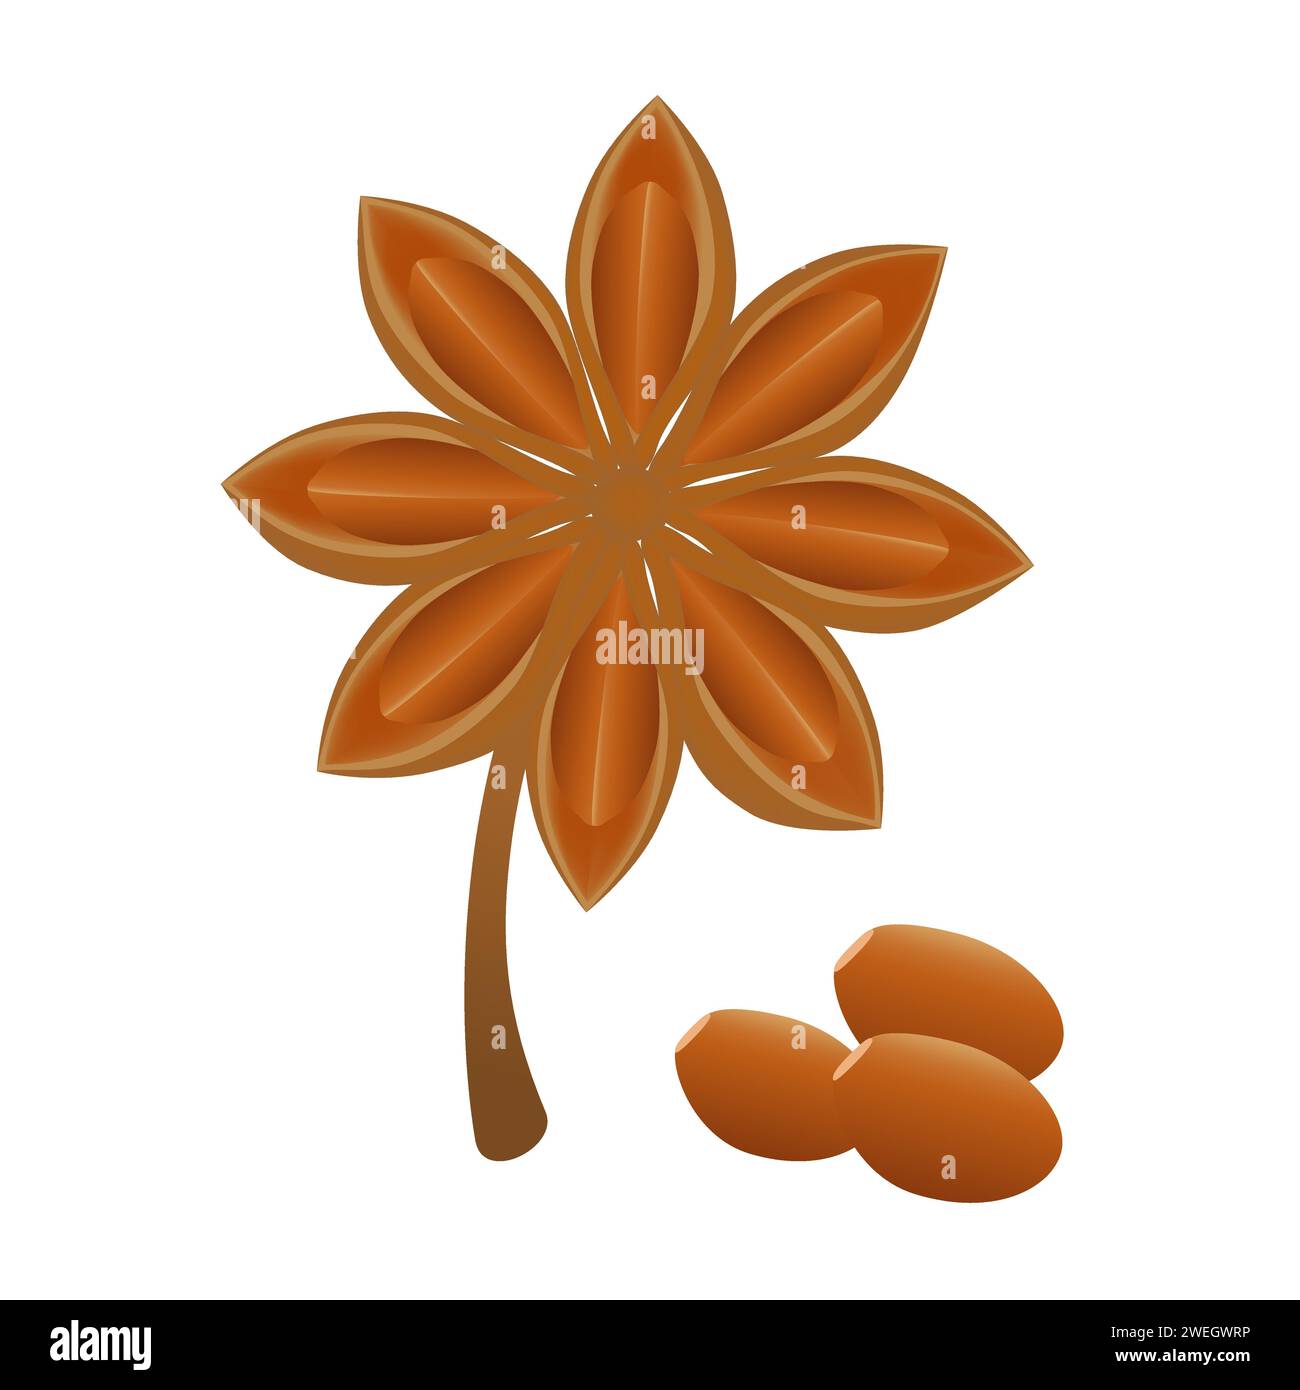 Star anise fruits with seeds on a white background. Stock Vector